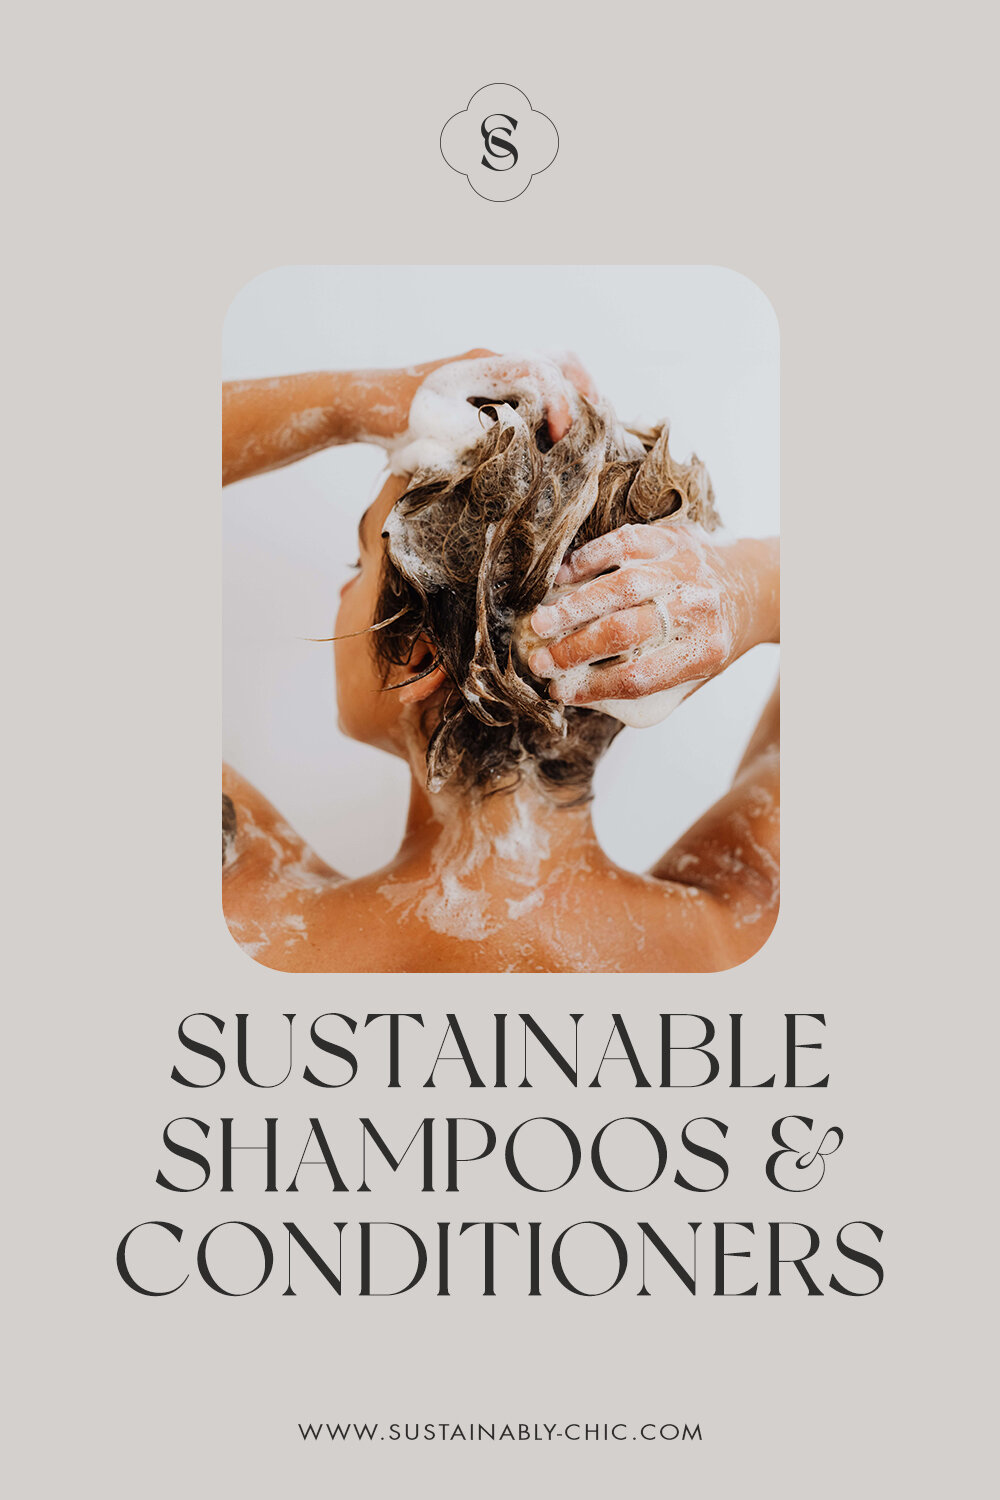 Sustainably Chic | Sustainable Fashion & Beauty Blog | Sustainable Shampoos & Conditioners.jpg